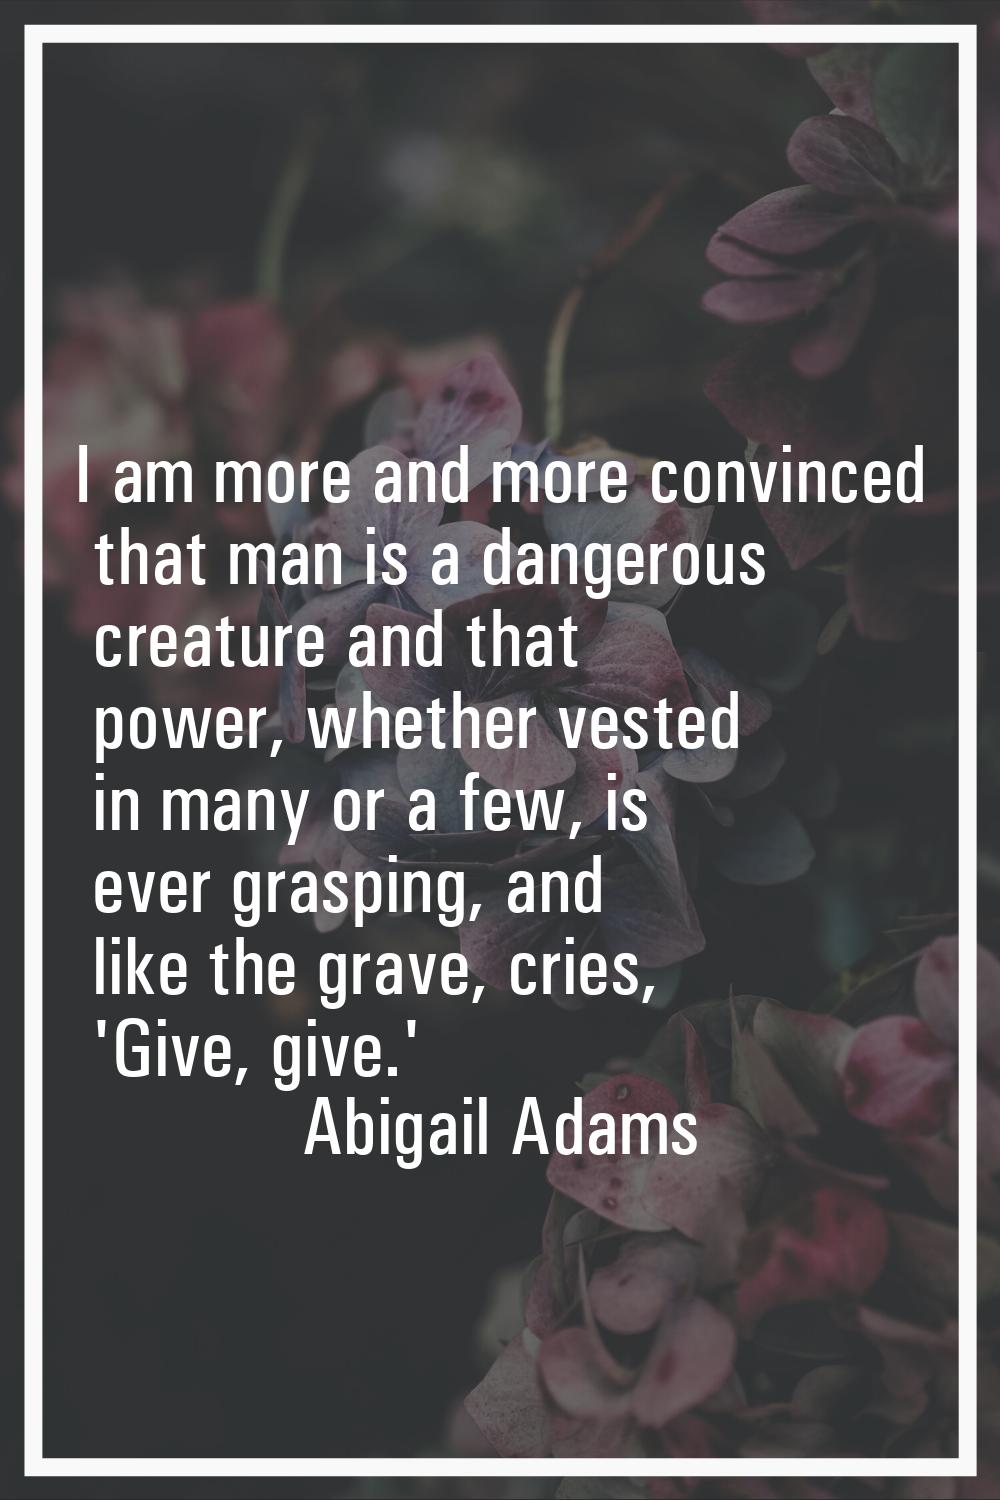 I am more and more convinced that man is a dangerous creature and that power, whether vested in man